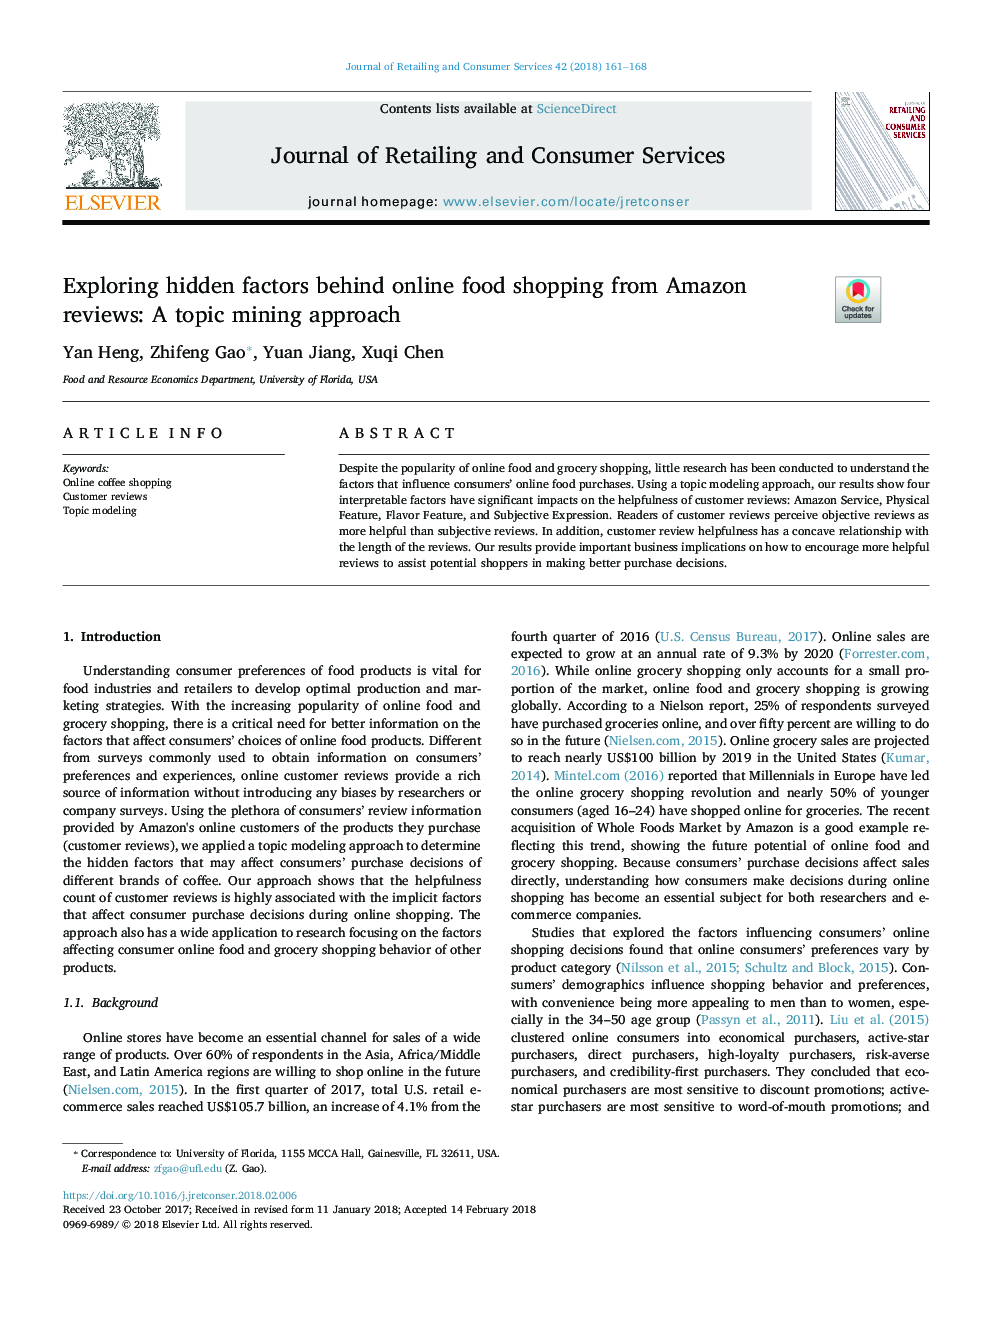 Exploring hidden factors behind online food shopping from Amazon reviews: A topic mining approach